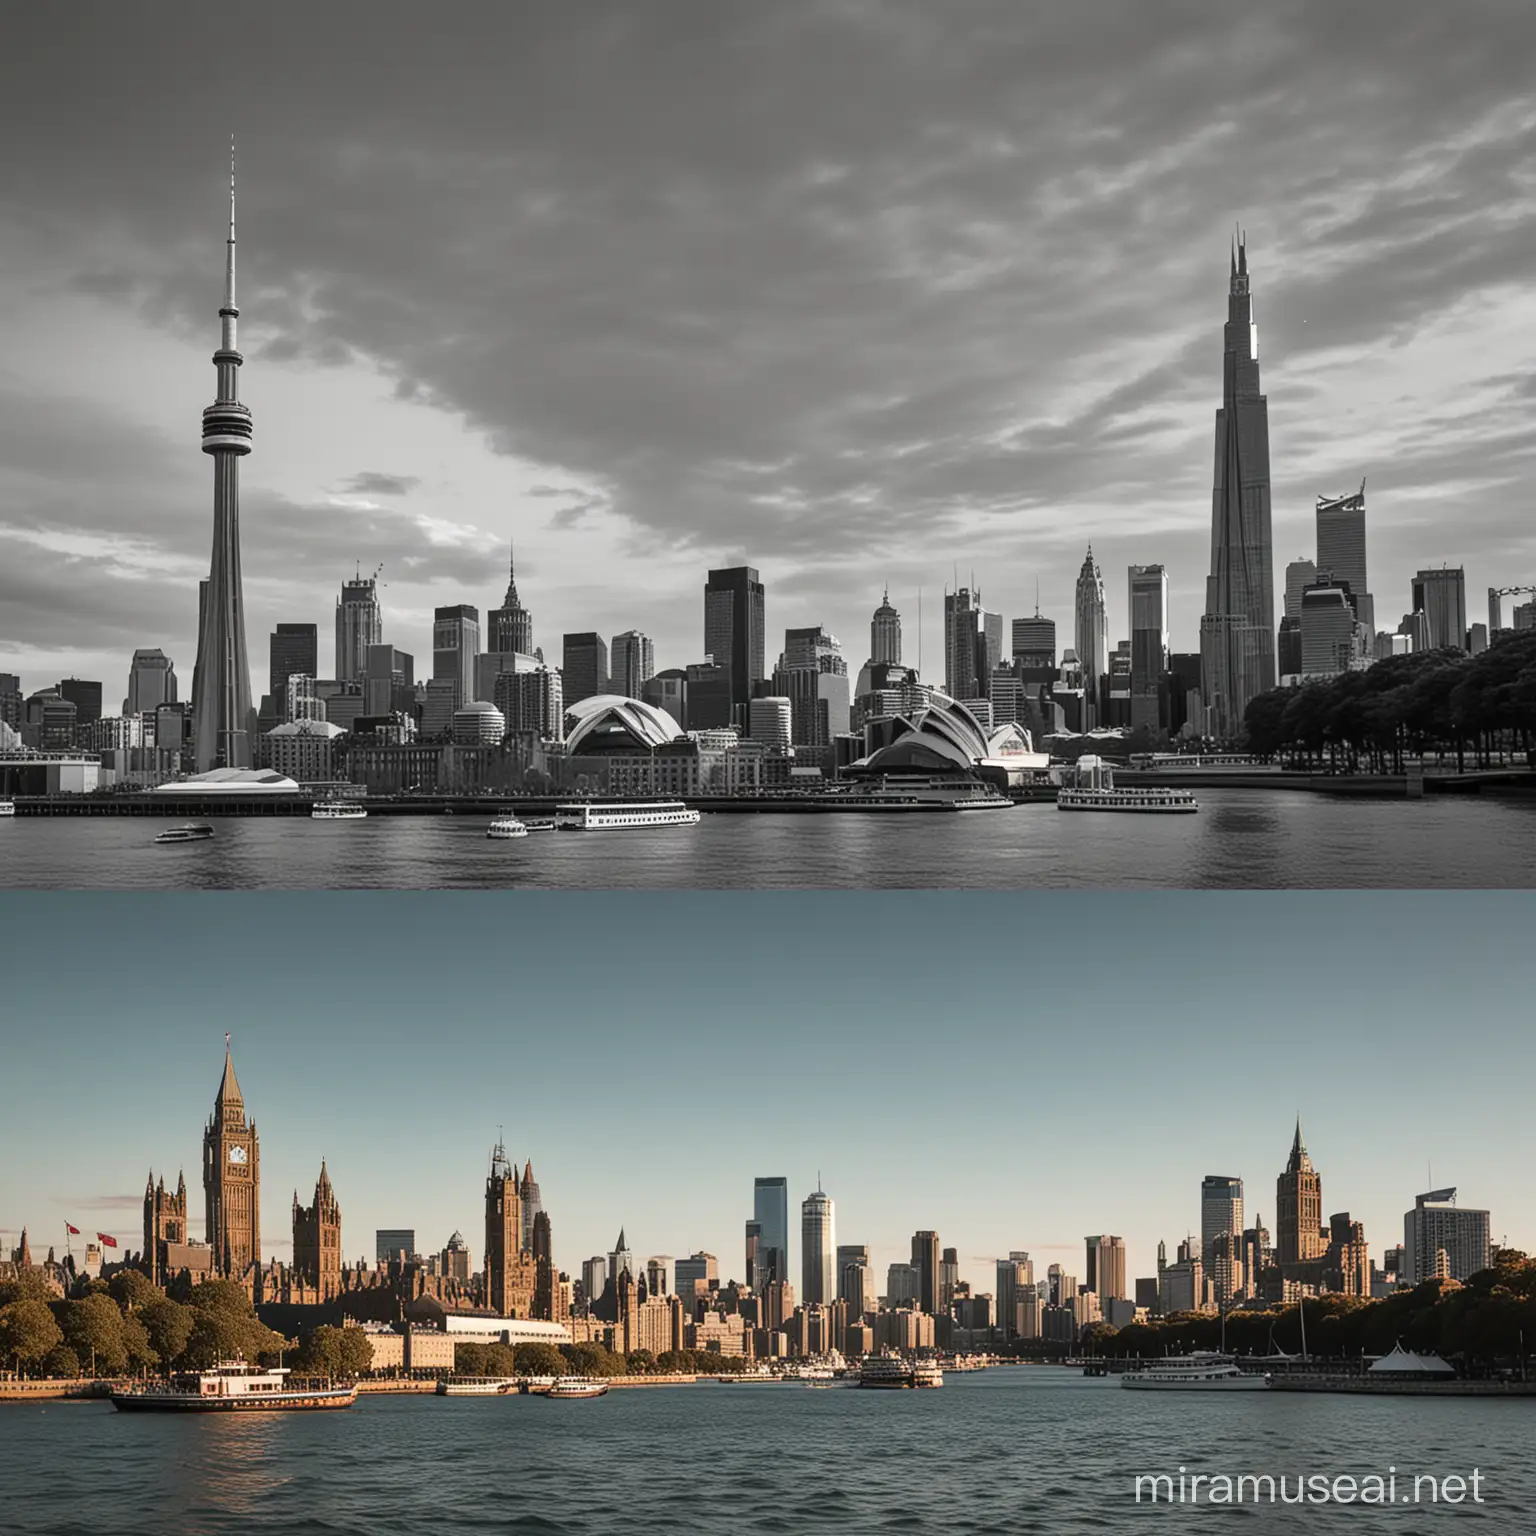 Generate an AI image showcasing iconic buildings from Canada, the USA, Australia, and the UK, positioned on the right side of the image. Include the CN Tower from Canada, the Statue of Liberty from the USA, the Sydney Opera House from Australia, and the Big Ben clock tower from the UK. These landmarks should be seamlessly integrated into a unified urban landscape, with complementary lighting and architectural coherence. The left side of the image can depict a serene natural backdrop or a modern cityscape, providing a contrast to the historic landmarks on the right.